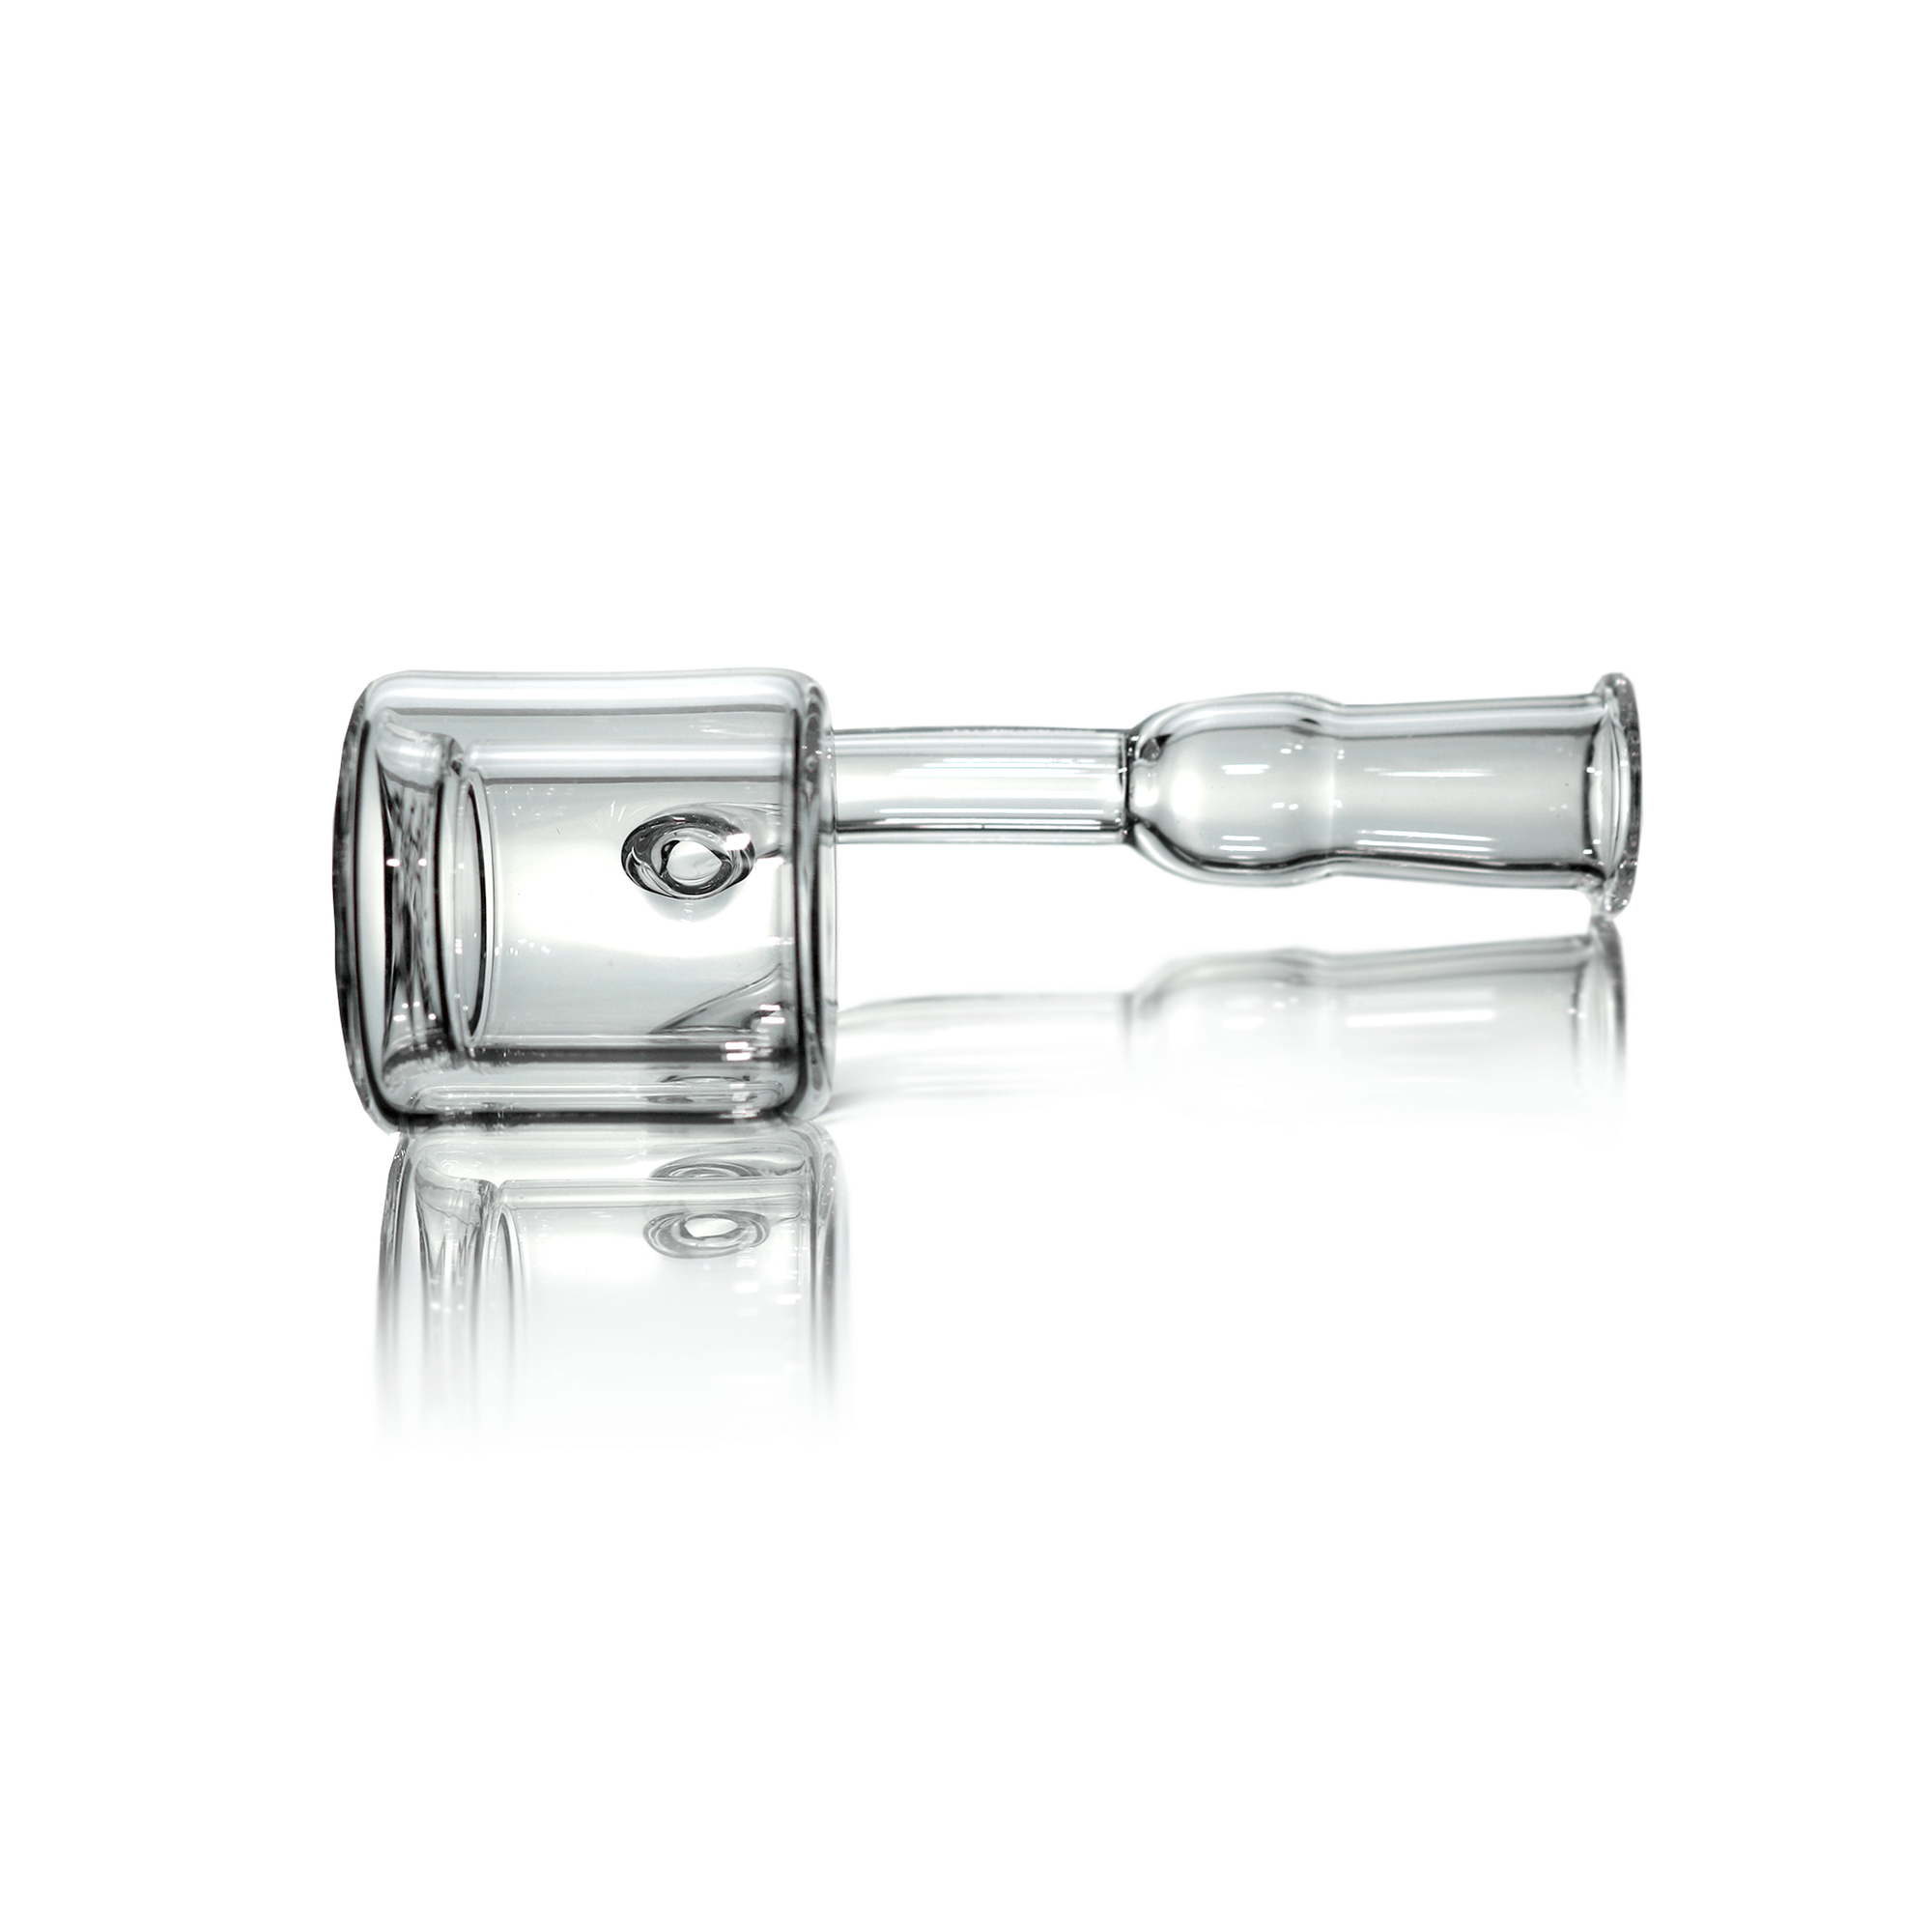 Quartz Double Wall Banger (Torch) | 10mm Female | Side View | the dabbing specialists